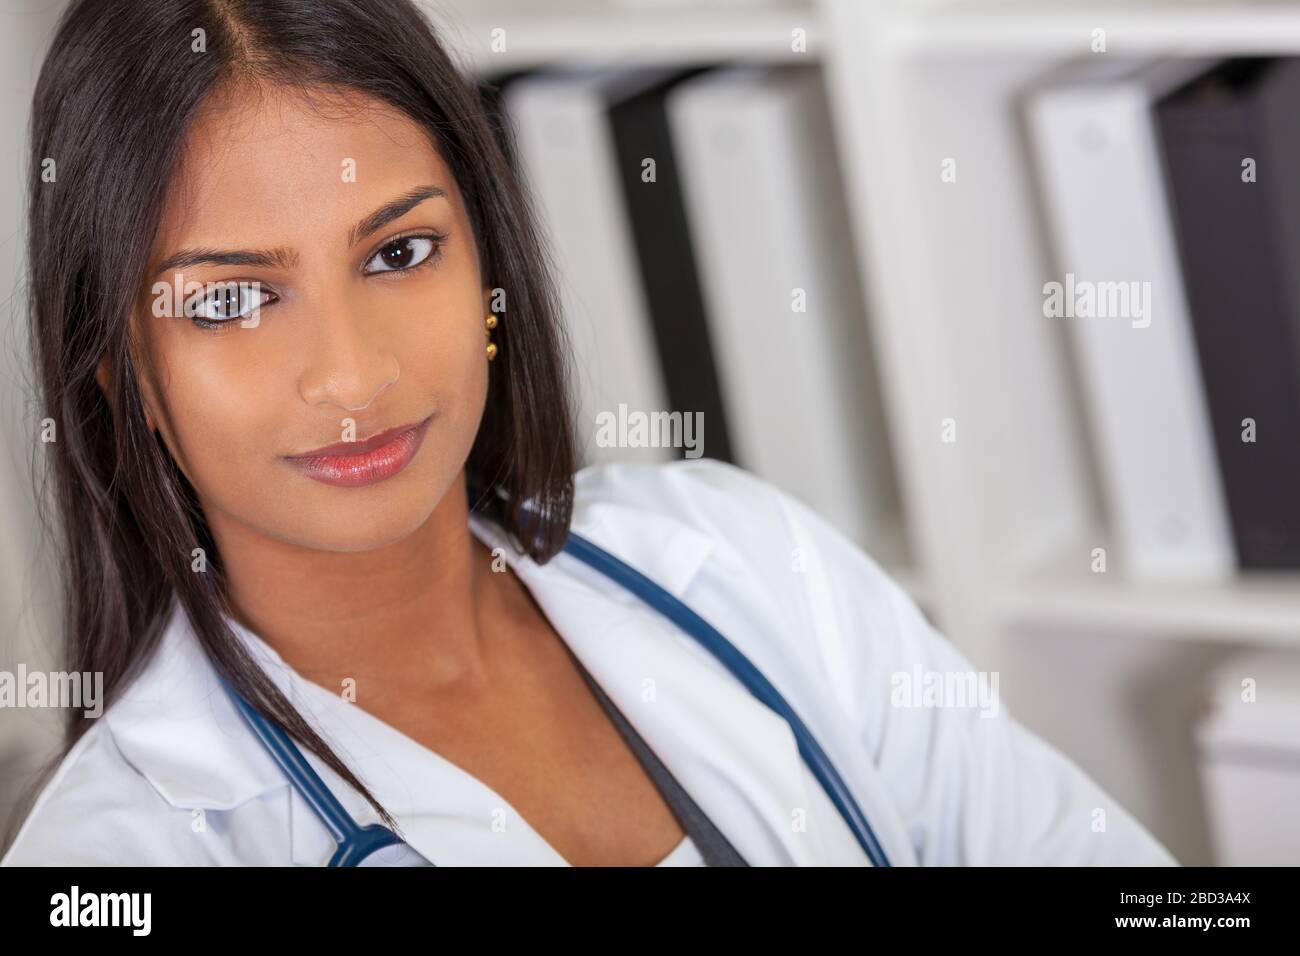 An Indian Asian female medical doctor in a hospital office happy and smiling with stethoscope Stock Photo